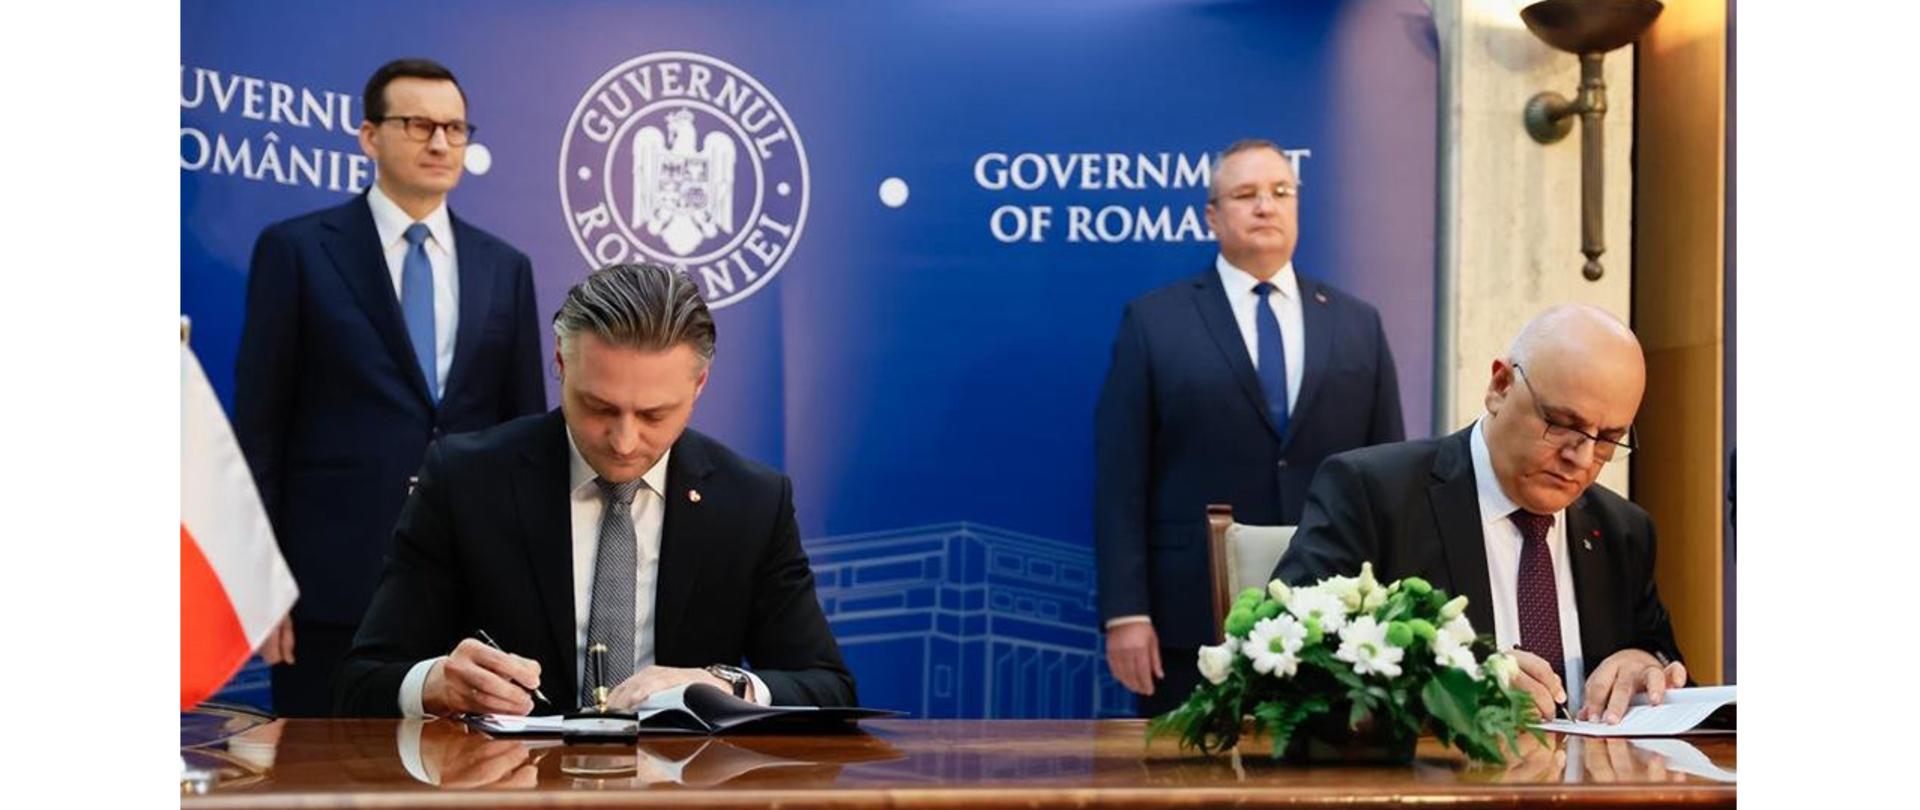 During the visit, the Ministry of Interior and the Ministry of Internal Affairs of Romania signed a joint Declaration on Cooperation in the field of Civil Protection.